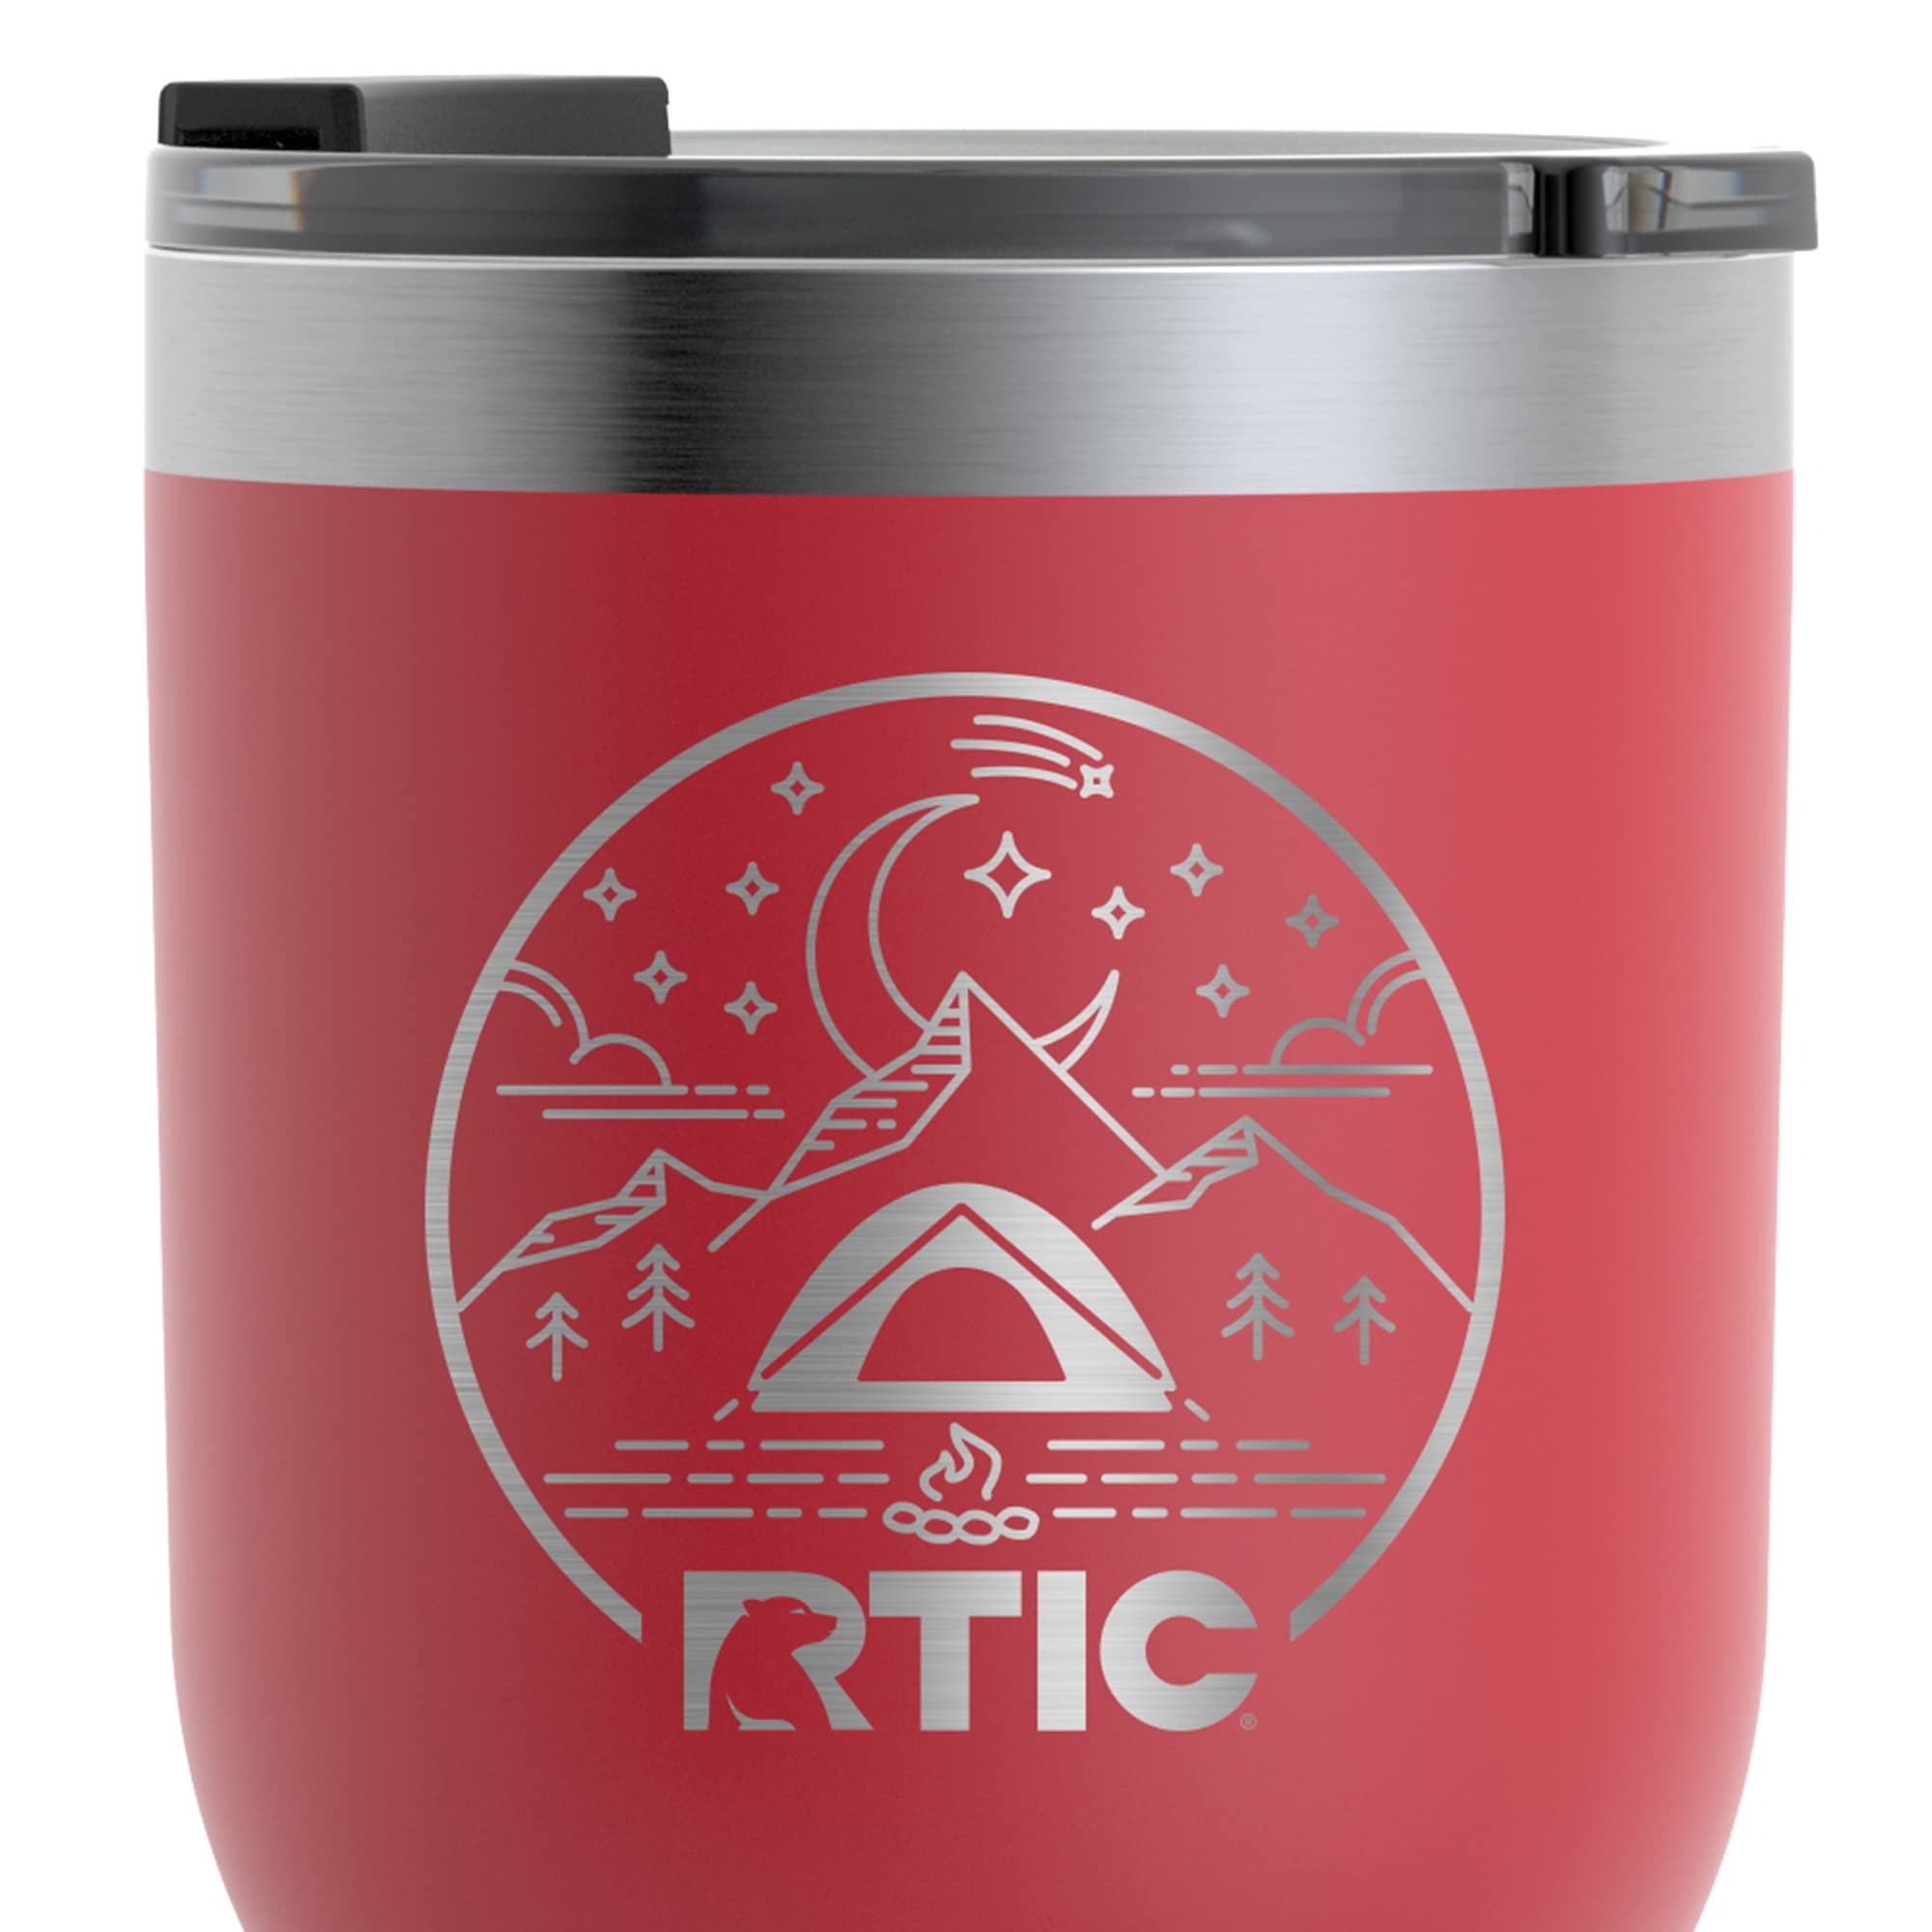 RTIC Tumbler, 30 oz Insulated Tumbler Stainless Steel Coffee Travel Mug  with Lid, Spill Proof, Hot B…See more RTIC Tumbler, 30 oz Insulated Tumbler